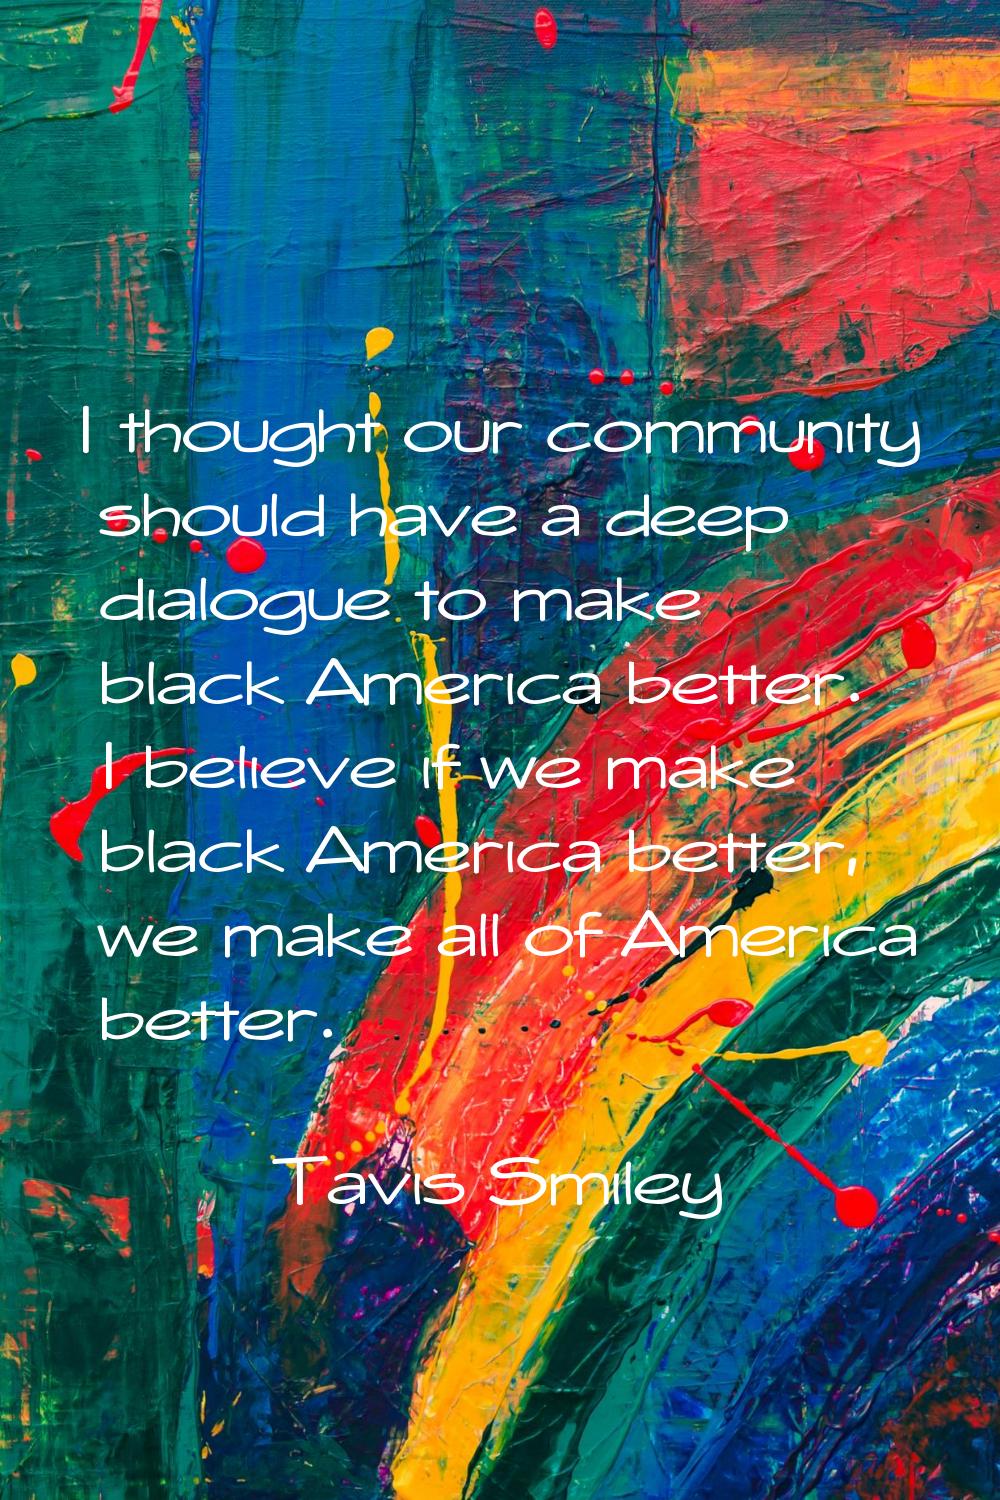 I thought our community should have a deep dialogue to make black America better. I believe if we m